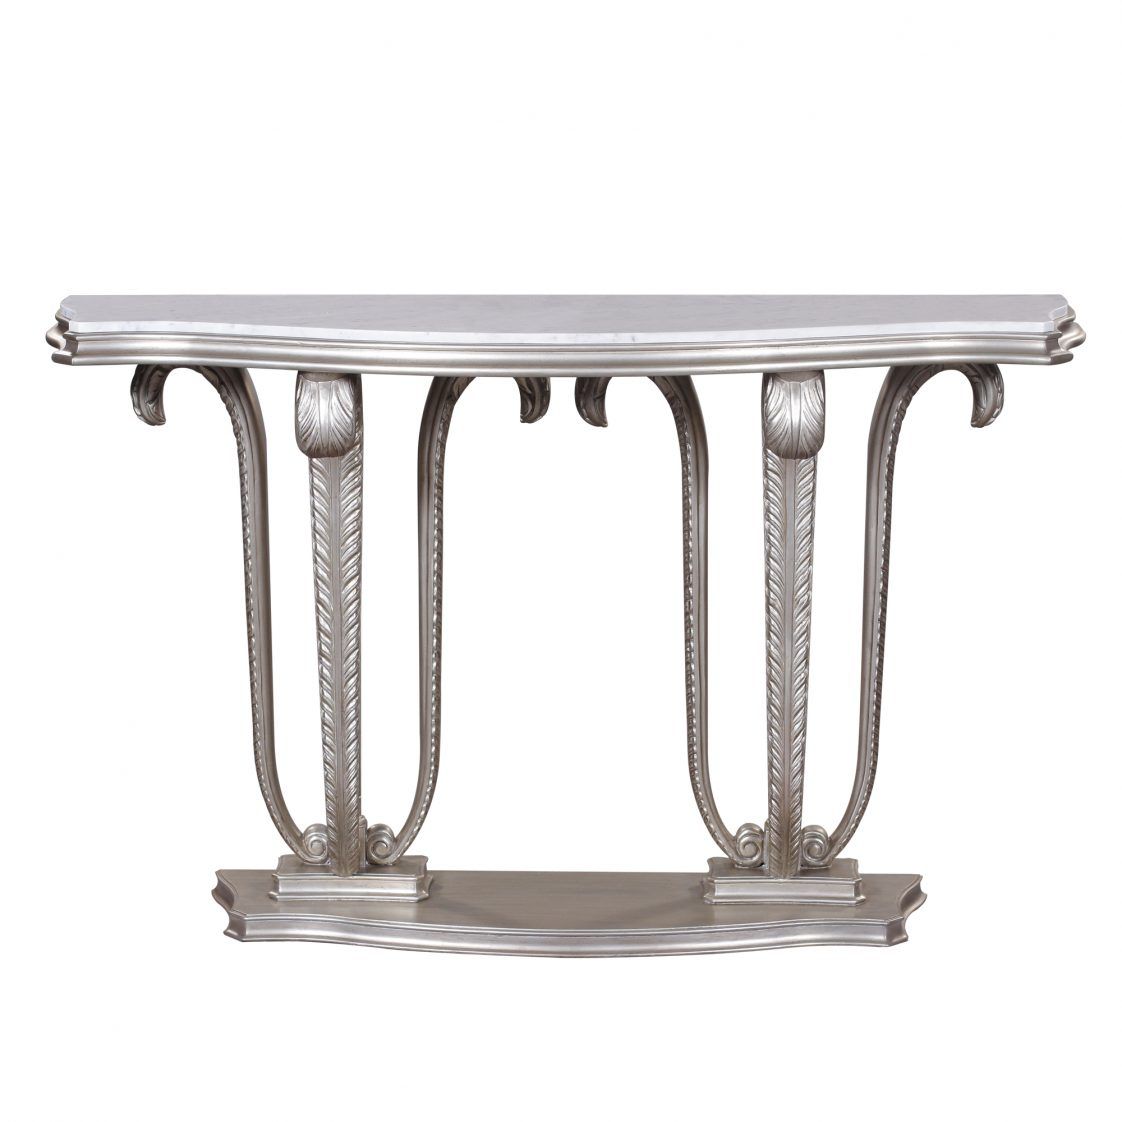 Console Table Plume White Marble | Jansen Furniture Regarding Marble Console Tables (View 20 of 20)